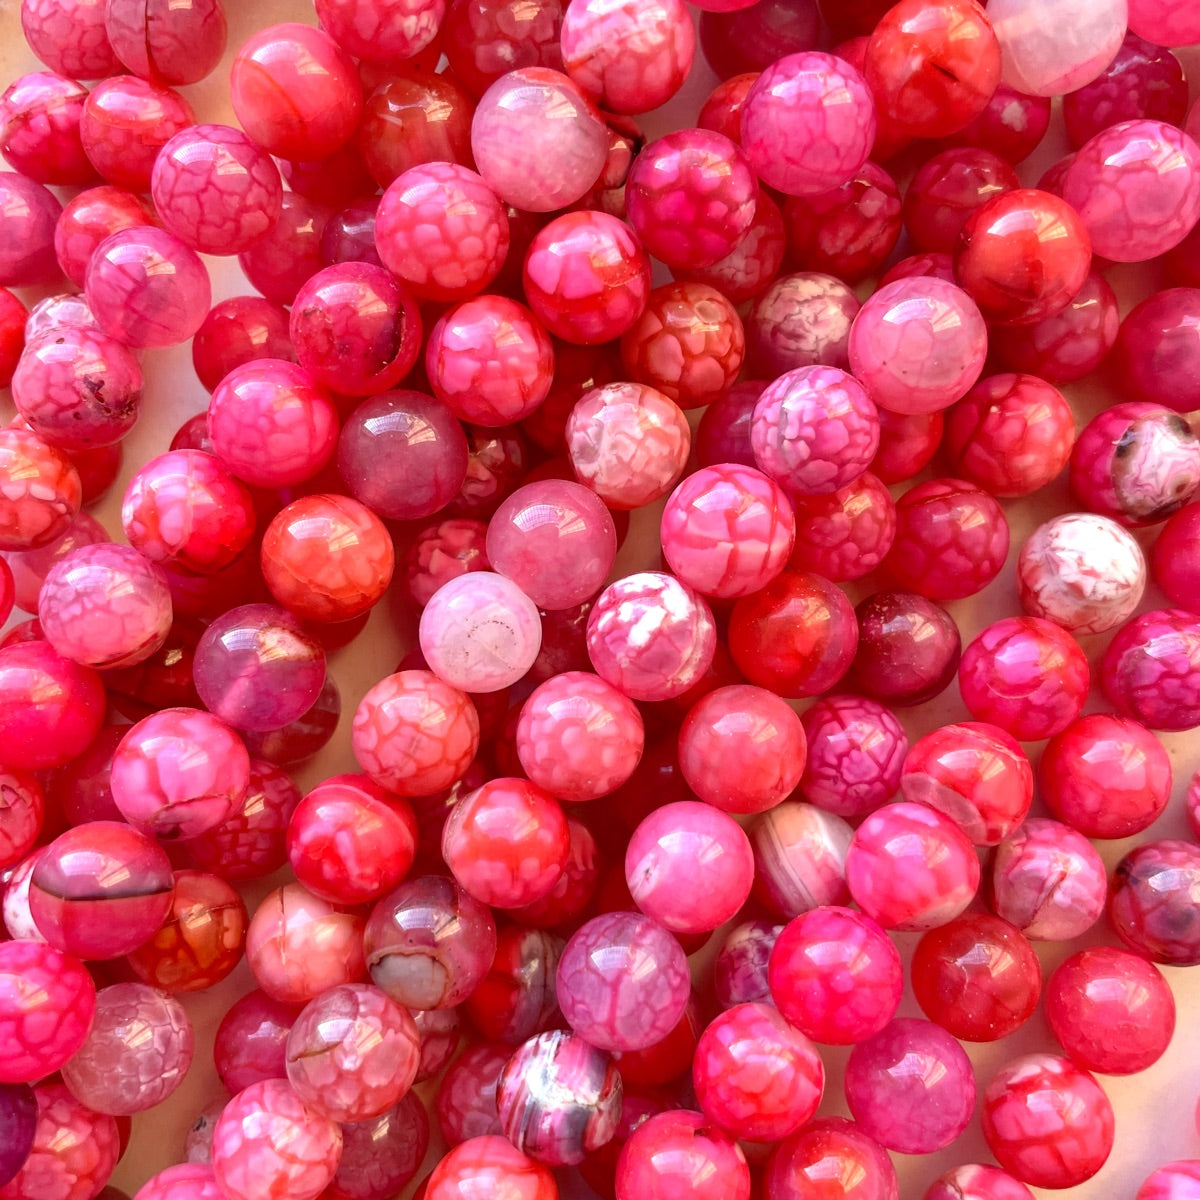 2 Strands/lot 10mm Pink Cracked Fire Agate Round Stone Beads Stone Beads Breast Cancer Awareness New Beads Arrivals Round Agate Beads Charms Beads Beyond